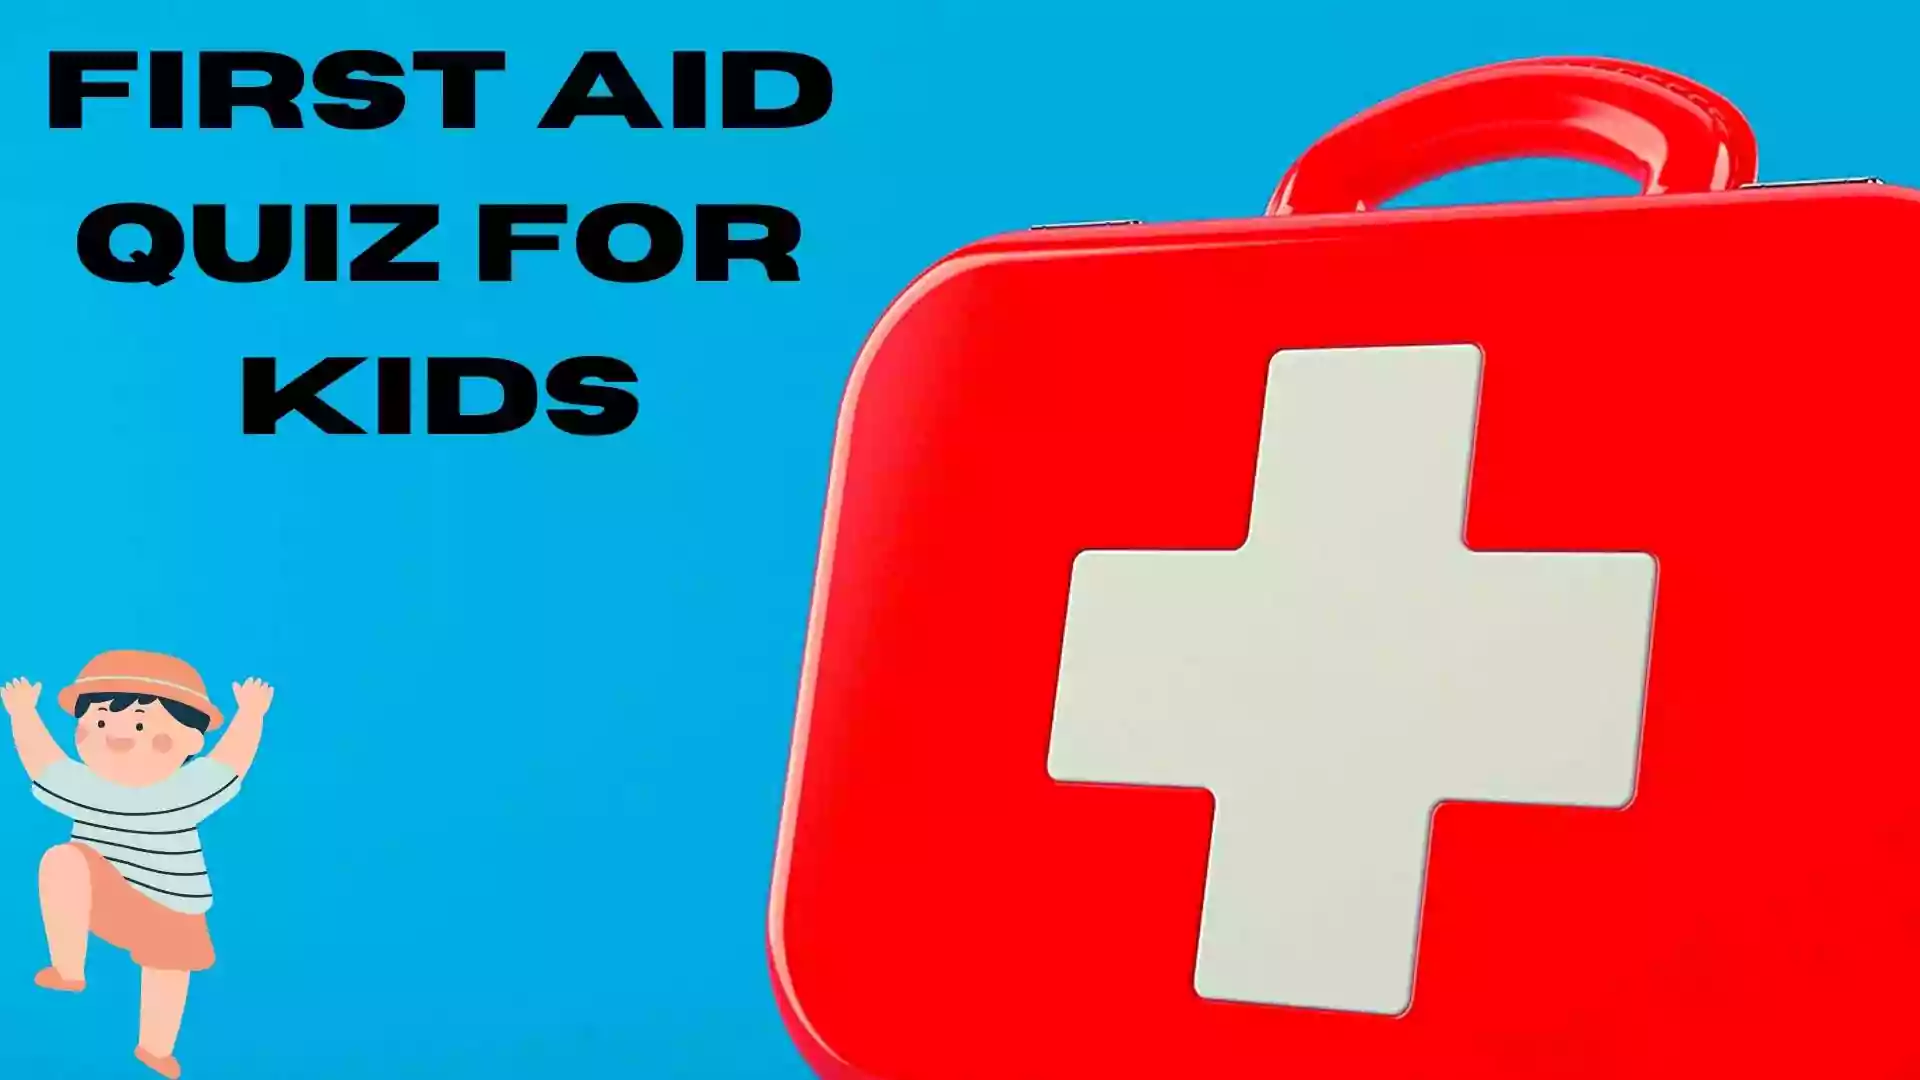 First Aid Quiz For Kids wallpaper and images